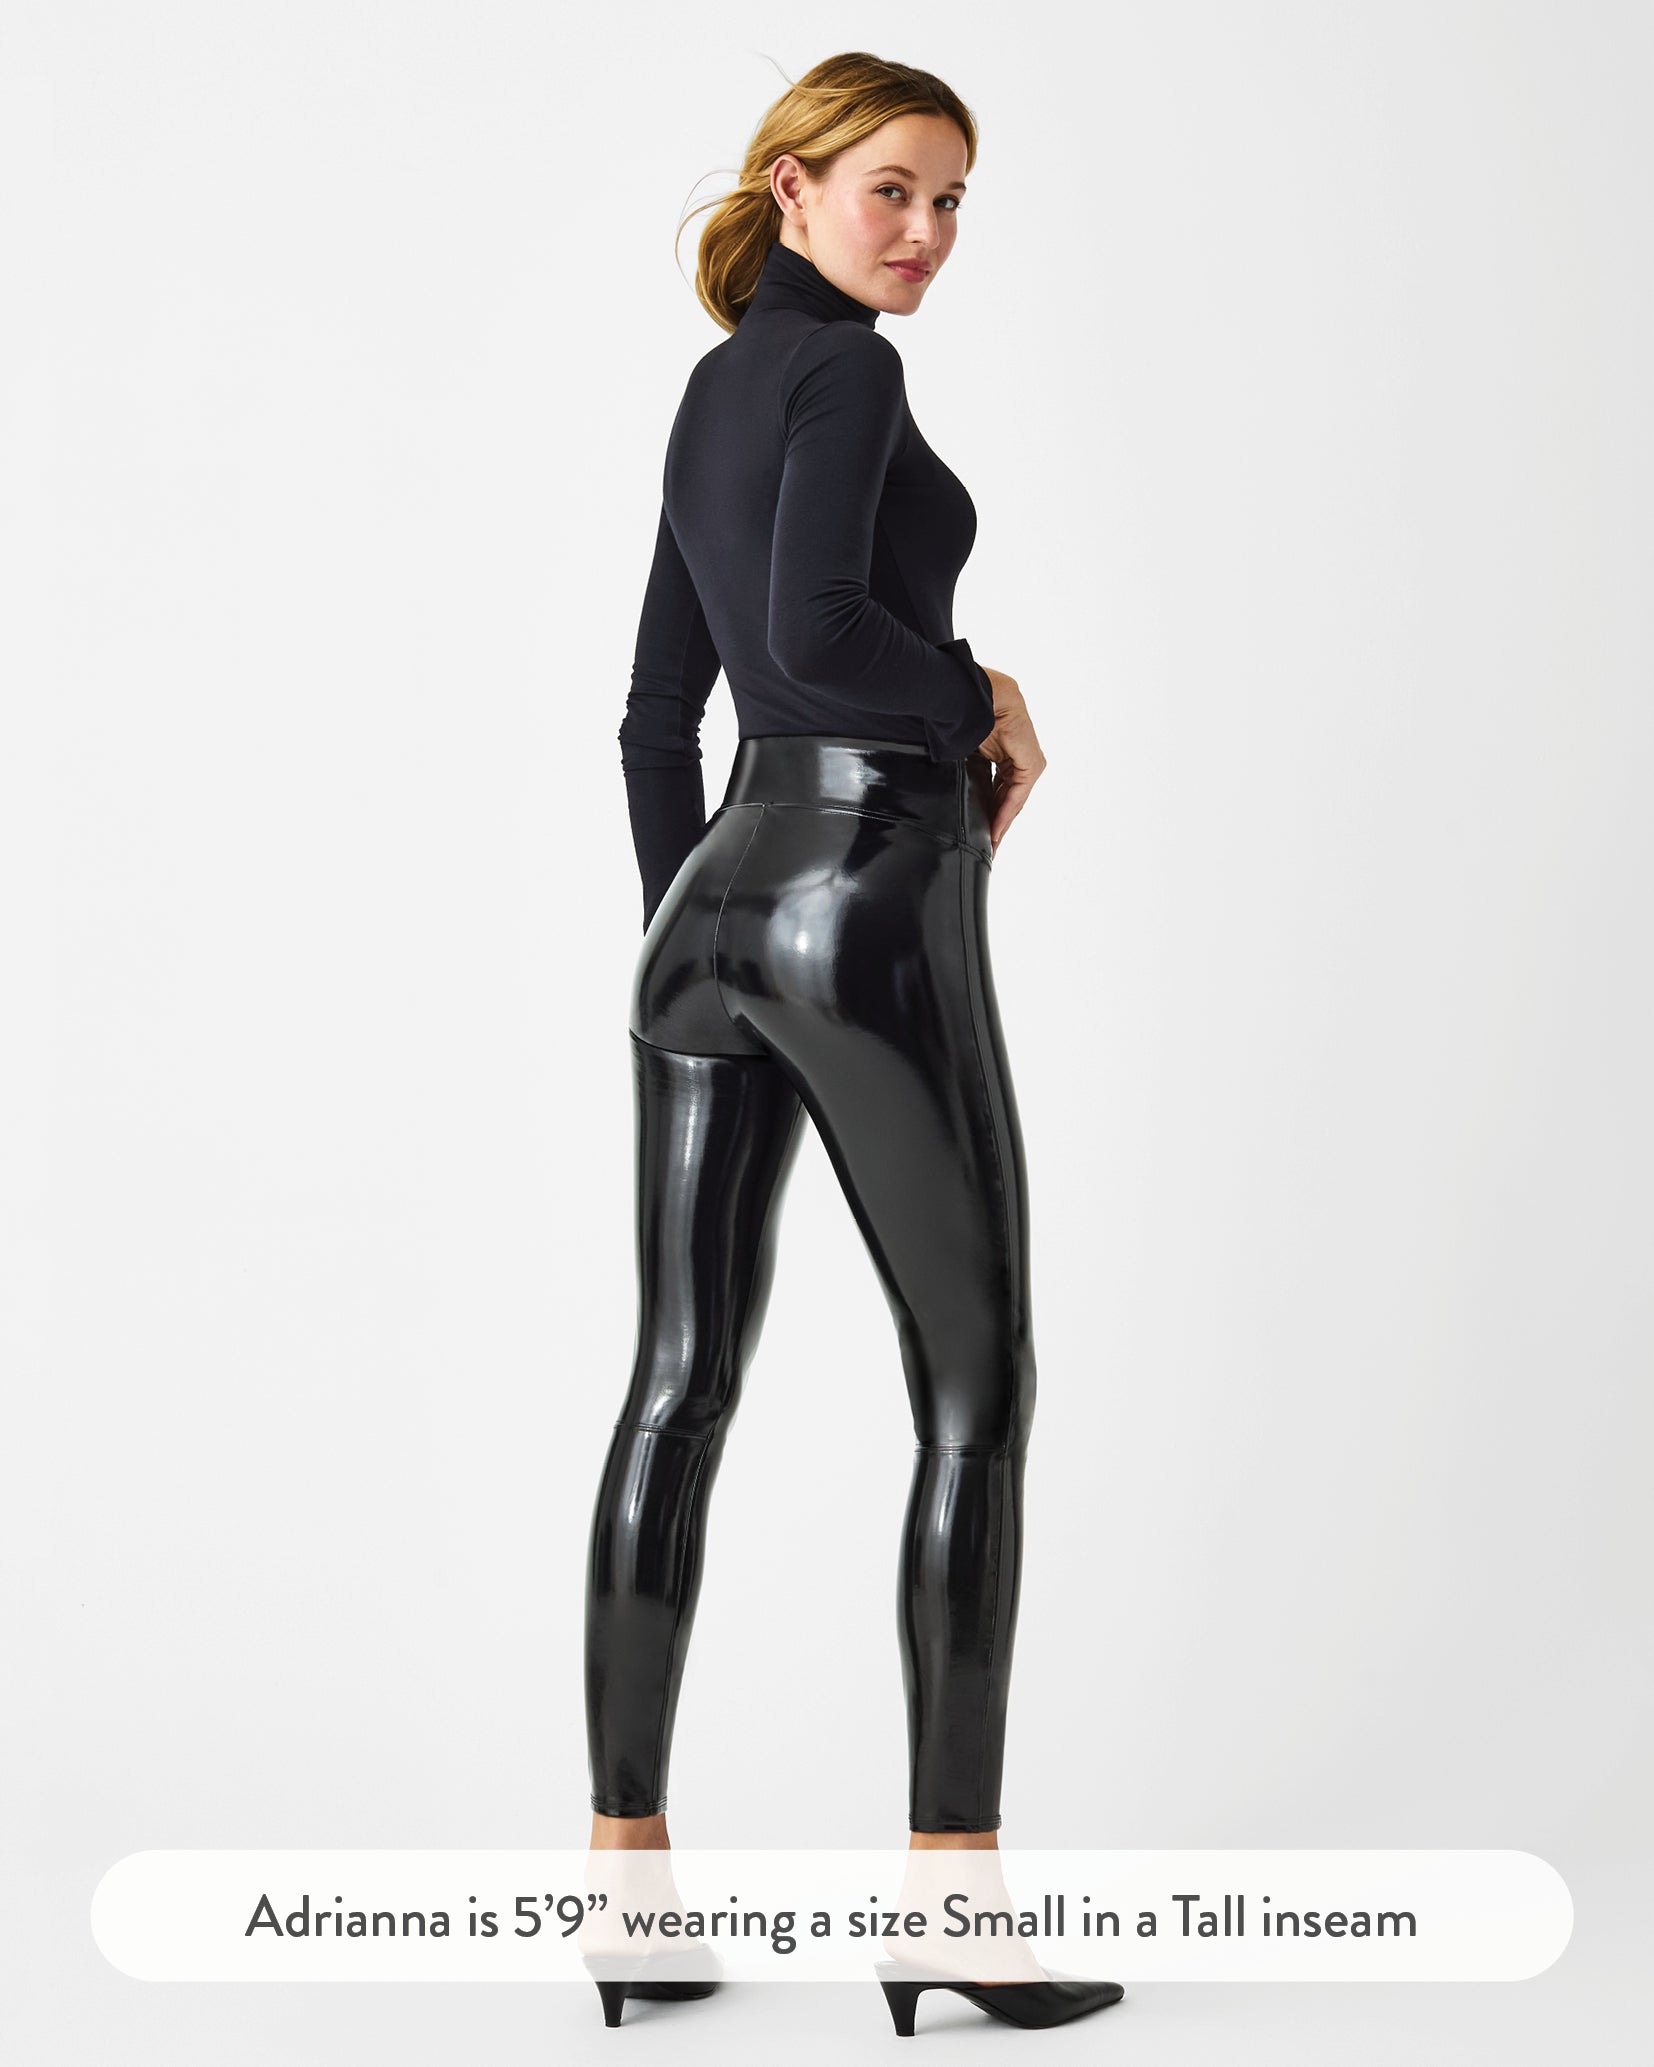 How to style the faux leather commando leggings for the weekend  Faux  leather leggings outfit, Leather leggings outfit, Shiny leggings outfit